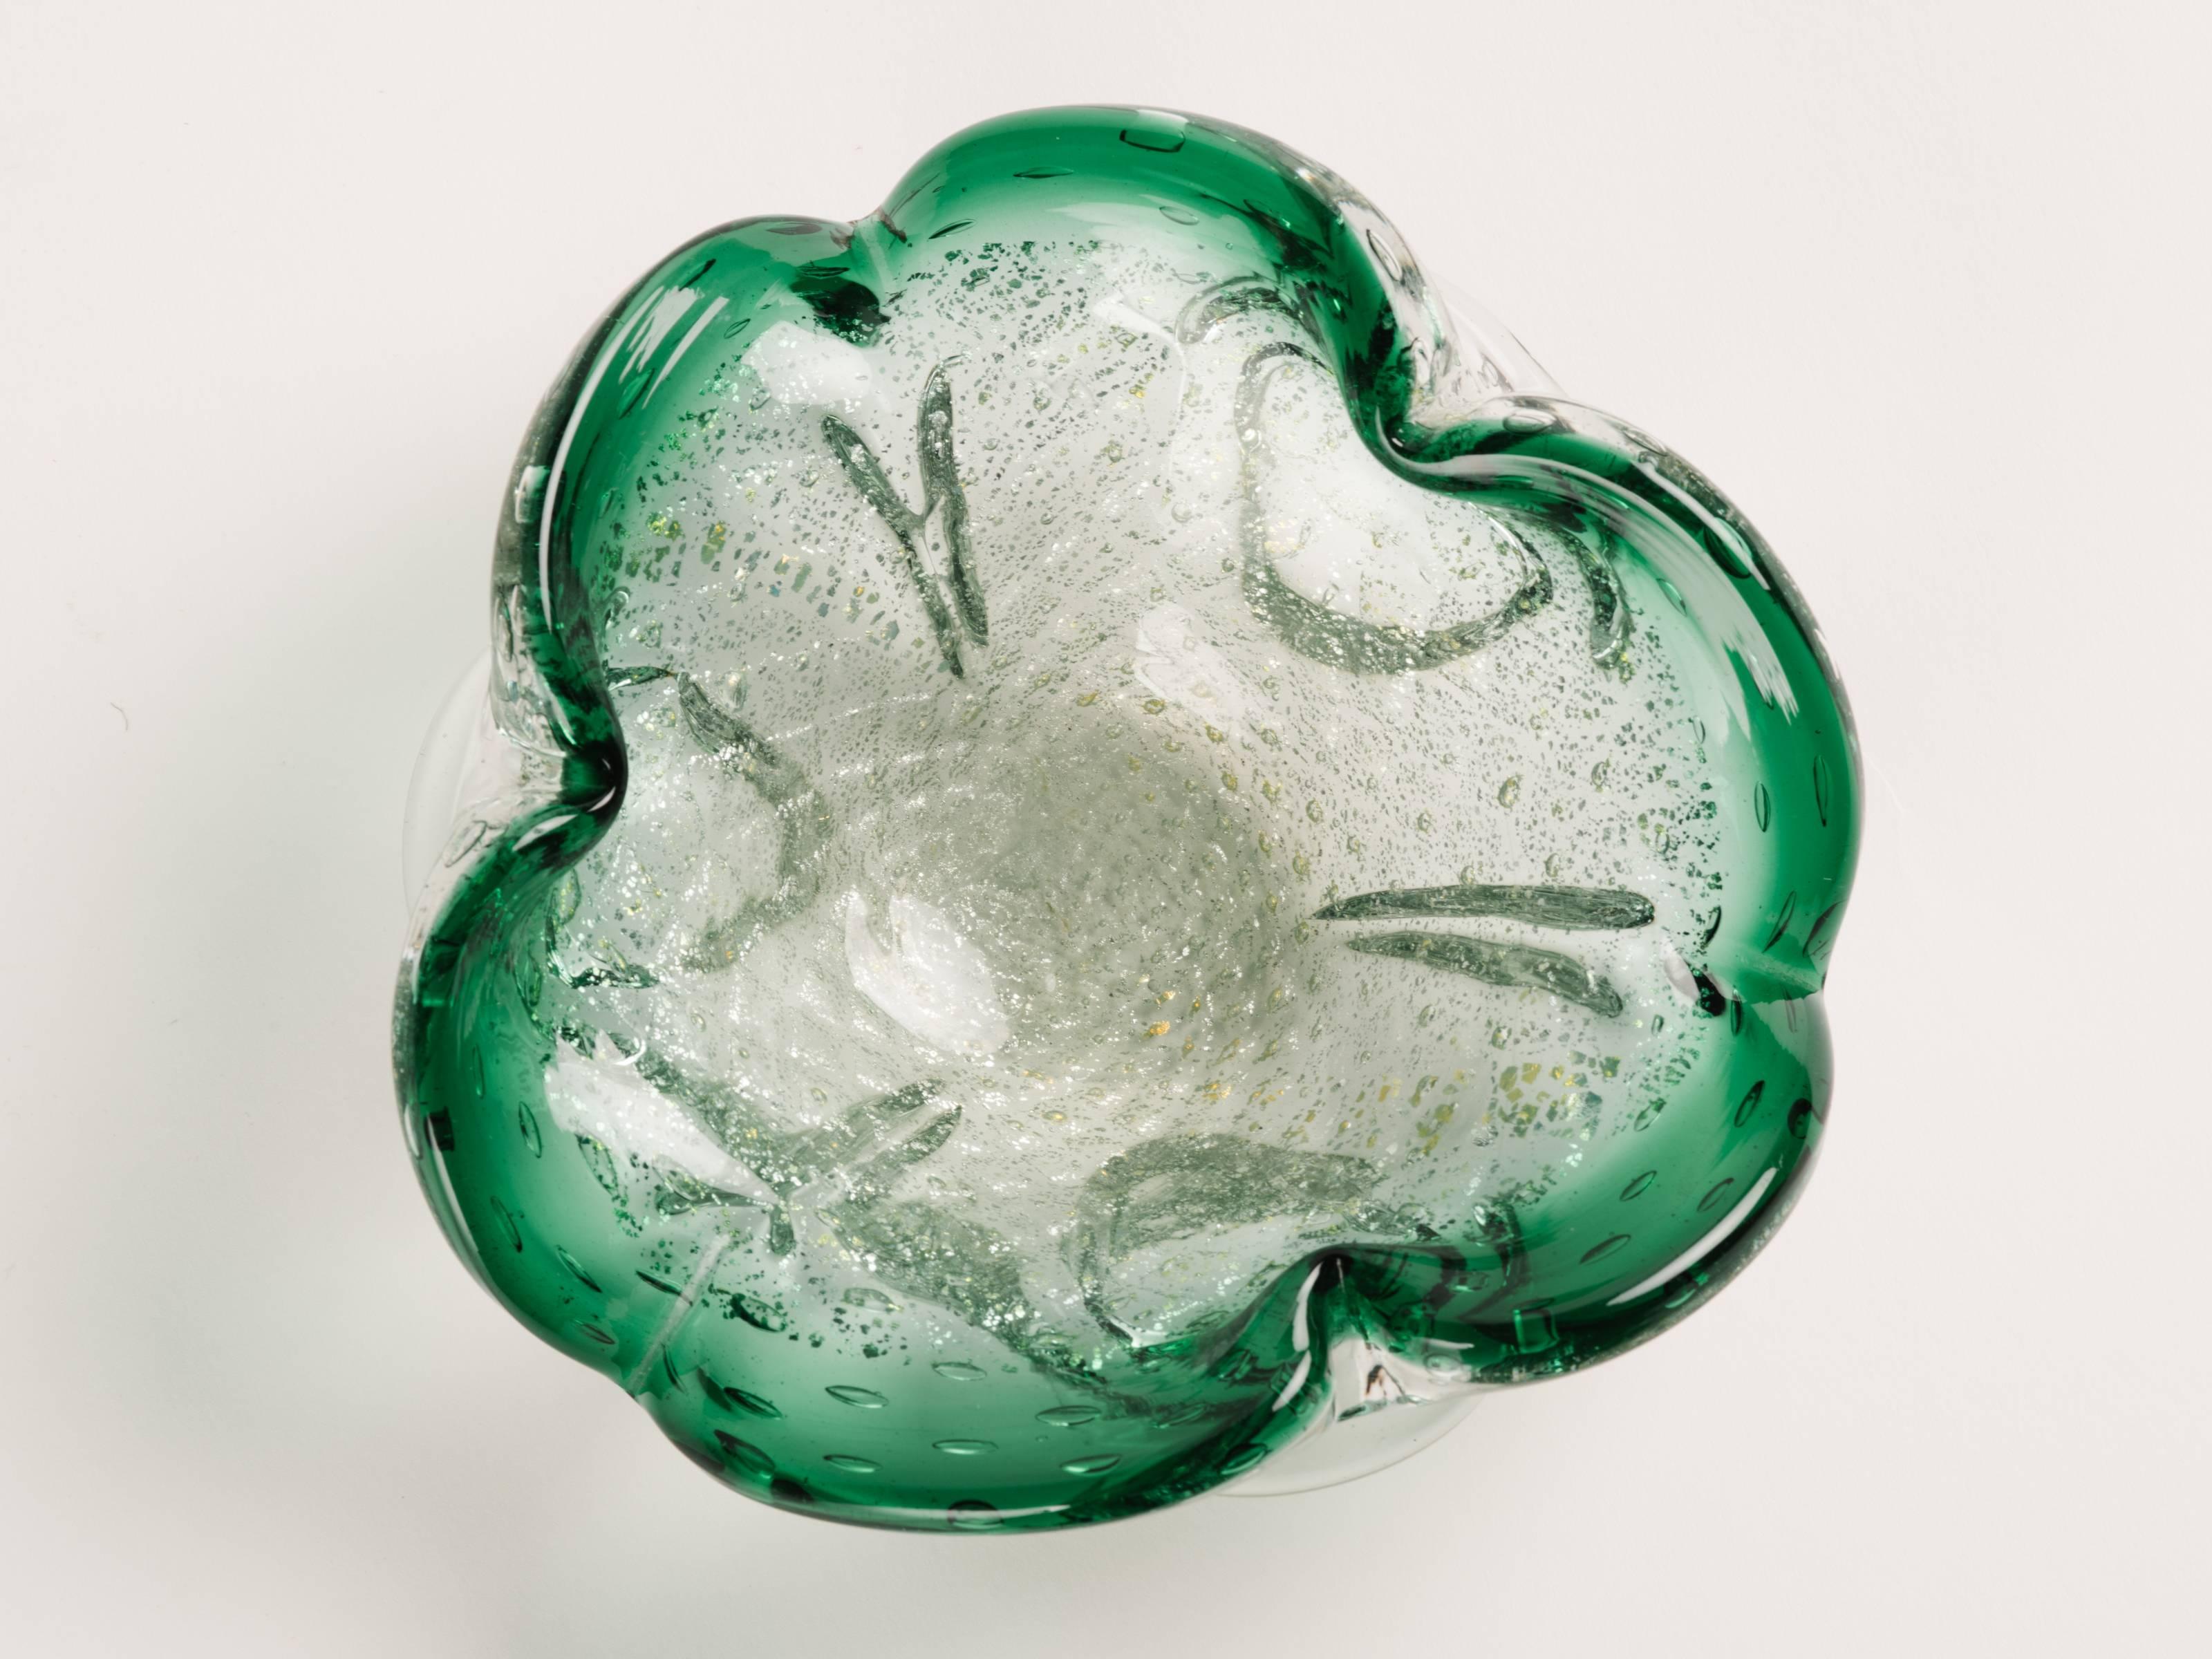 Mid-Century Modern Murano glass bowl or ashtray with organic form. Handblown process with bubble glass design in hues of emerald green with gold flecks accents. Features pinched rims with flared sides.